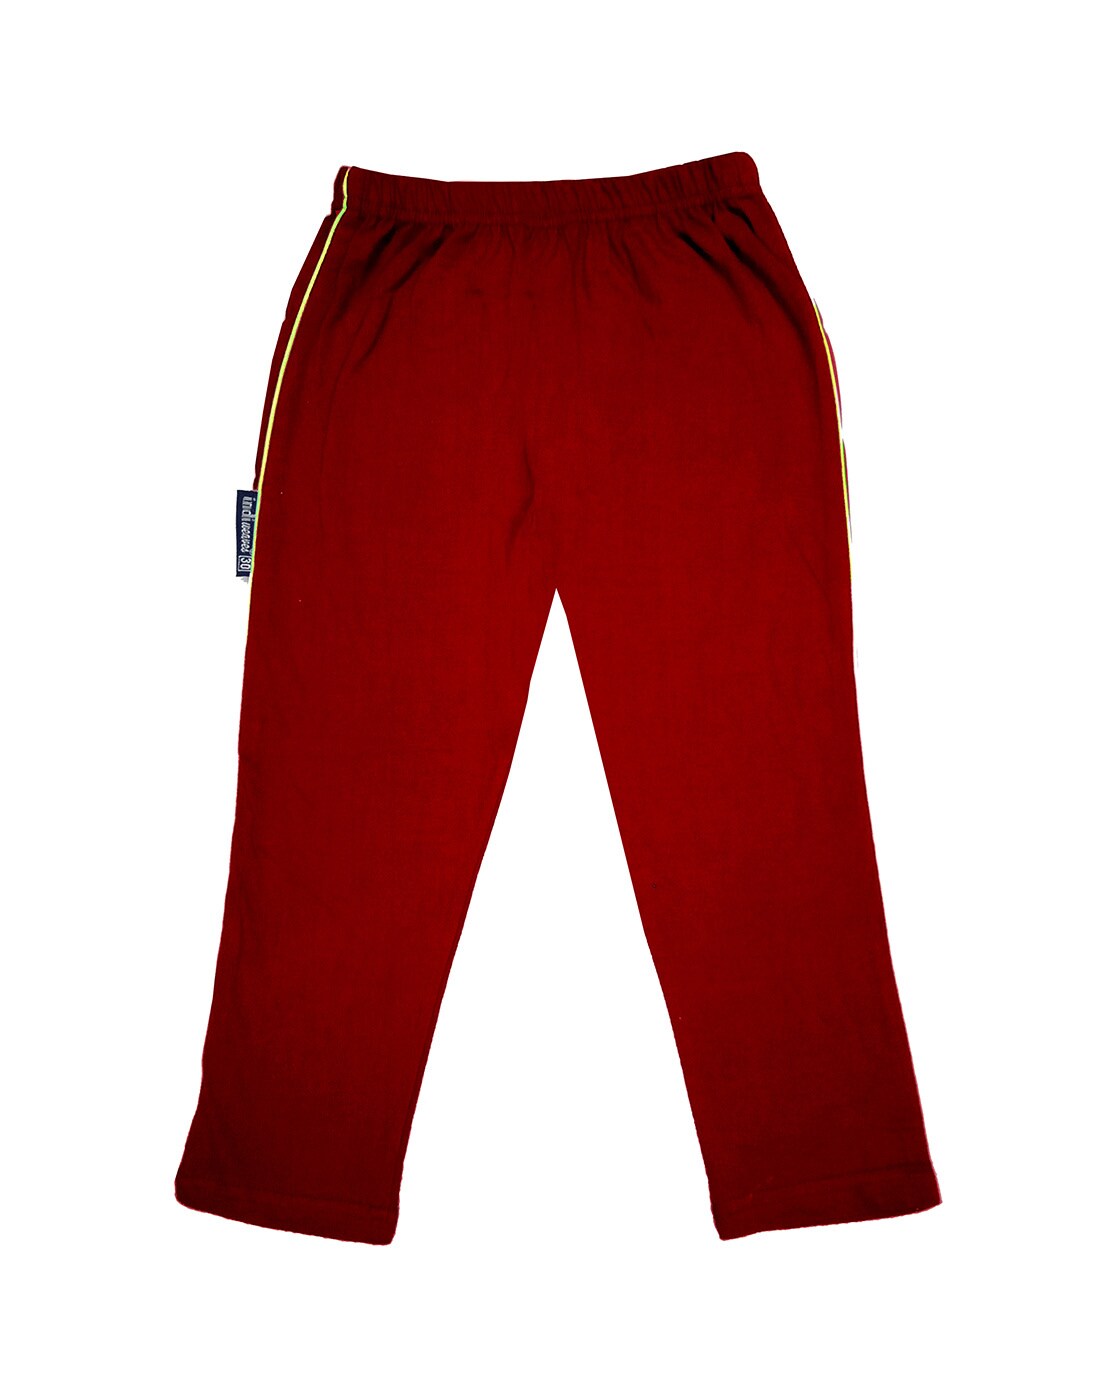 Buy White Trousers & Pants for Girls by INDIWEAVES Online